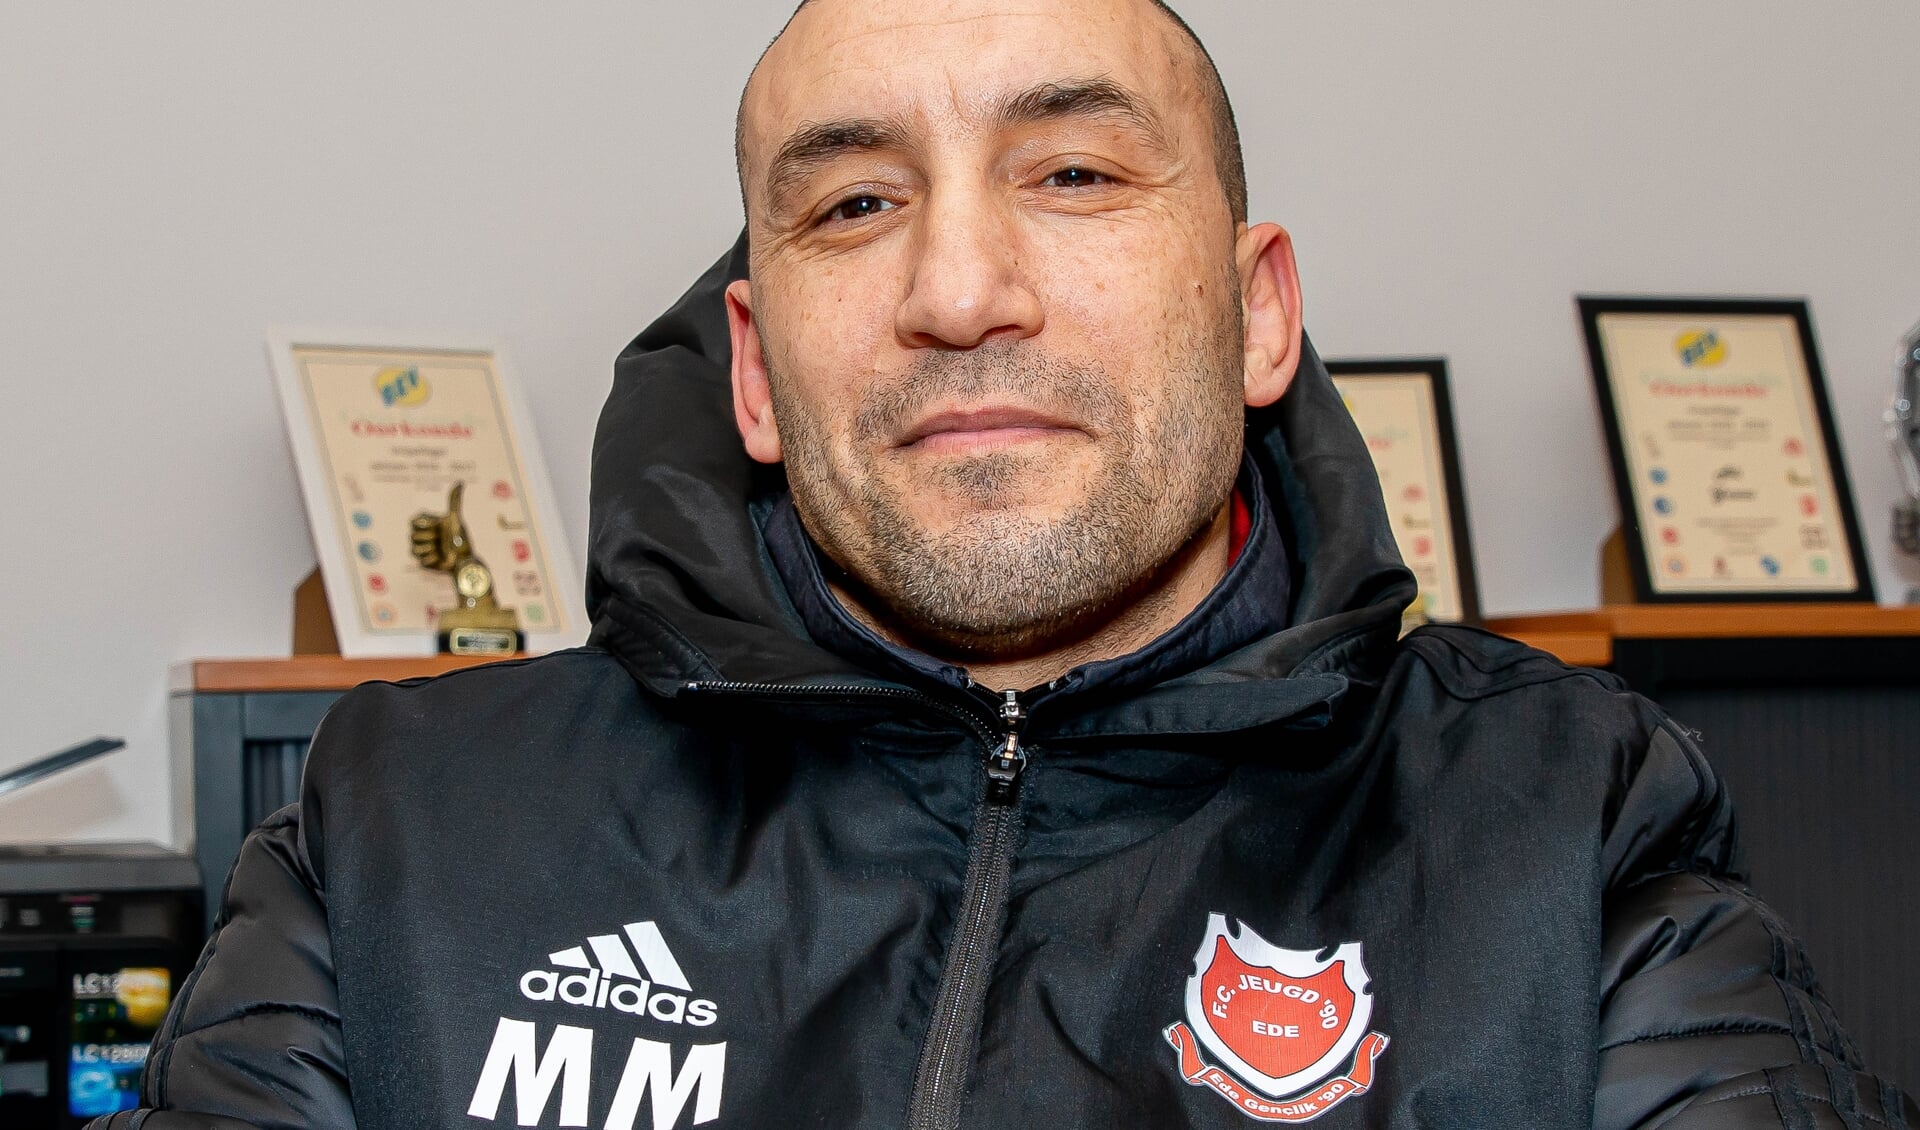 Mohammed Mouhouti.